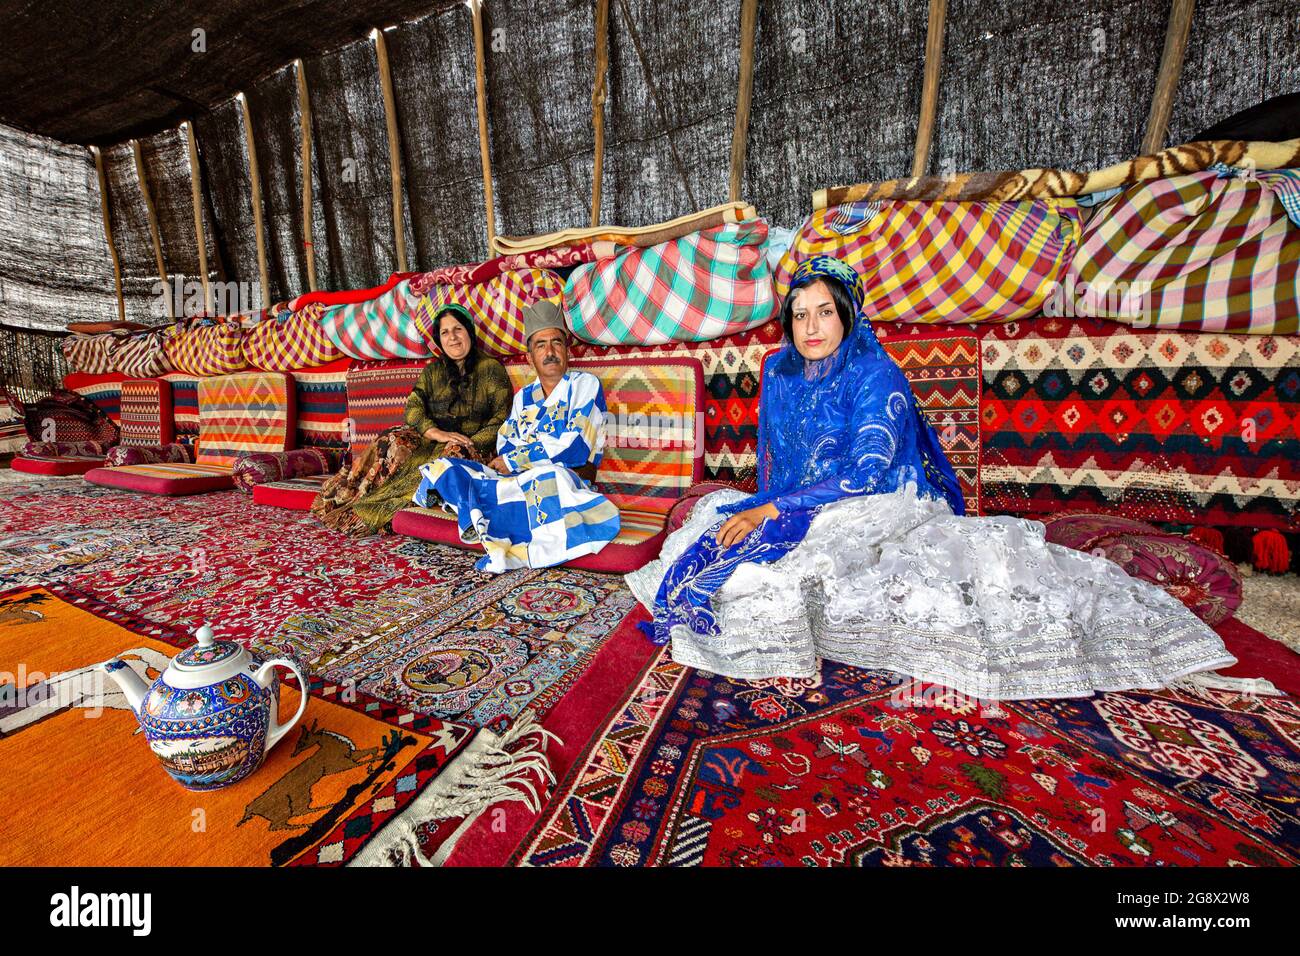 Iranian nomadic people known as Qashqai in the countryside of Firuzabad, Iran. Stock Photo